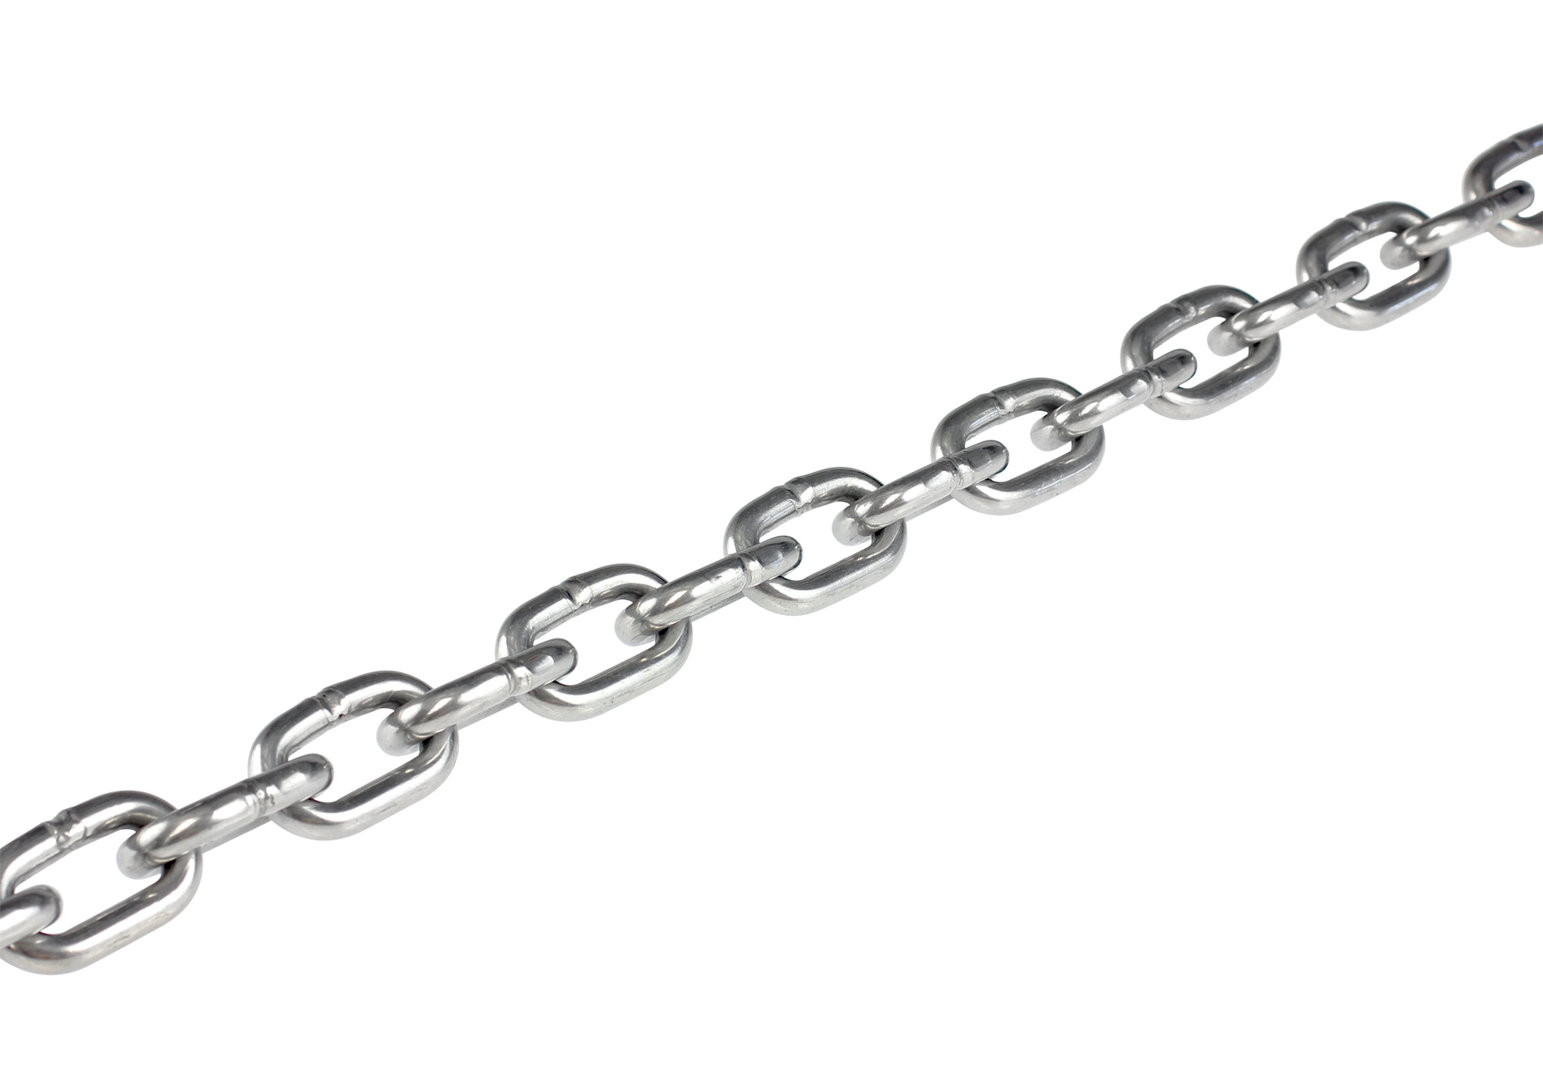 CHAIN 5mm link,1 Metre Length Stainless Steel 316